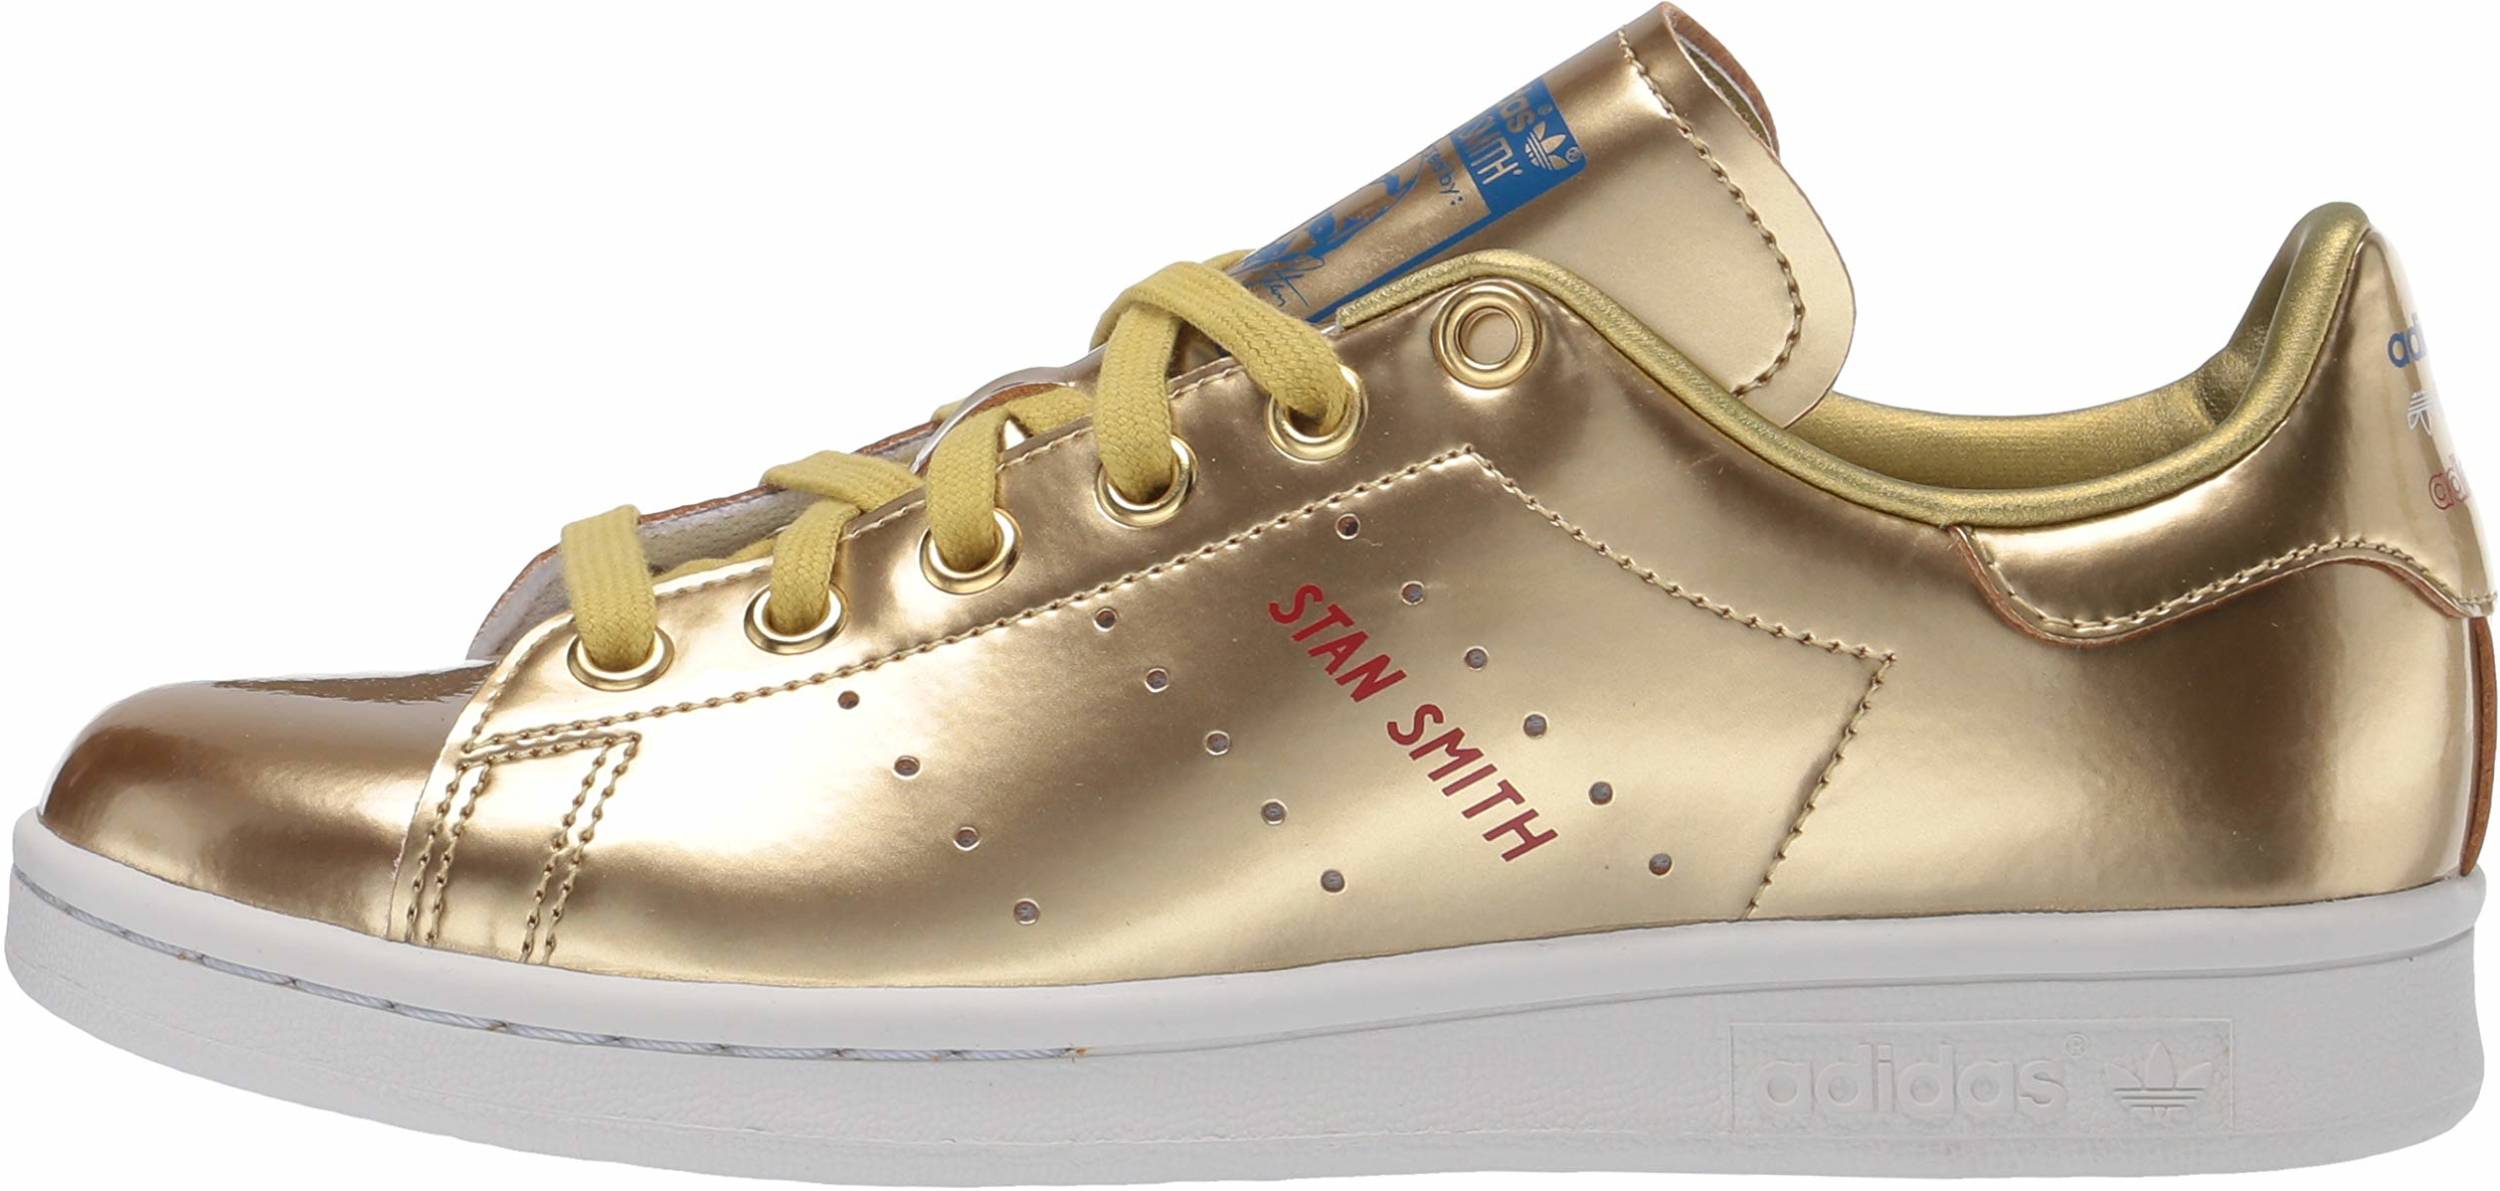 Save 29% on Gold Adidas Sneakers (5 